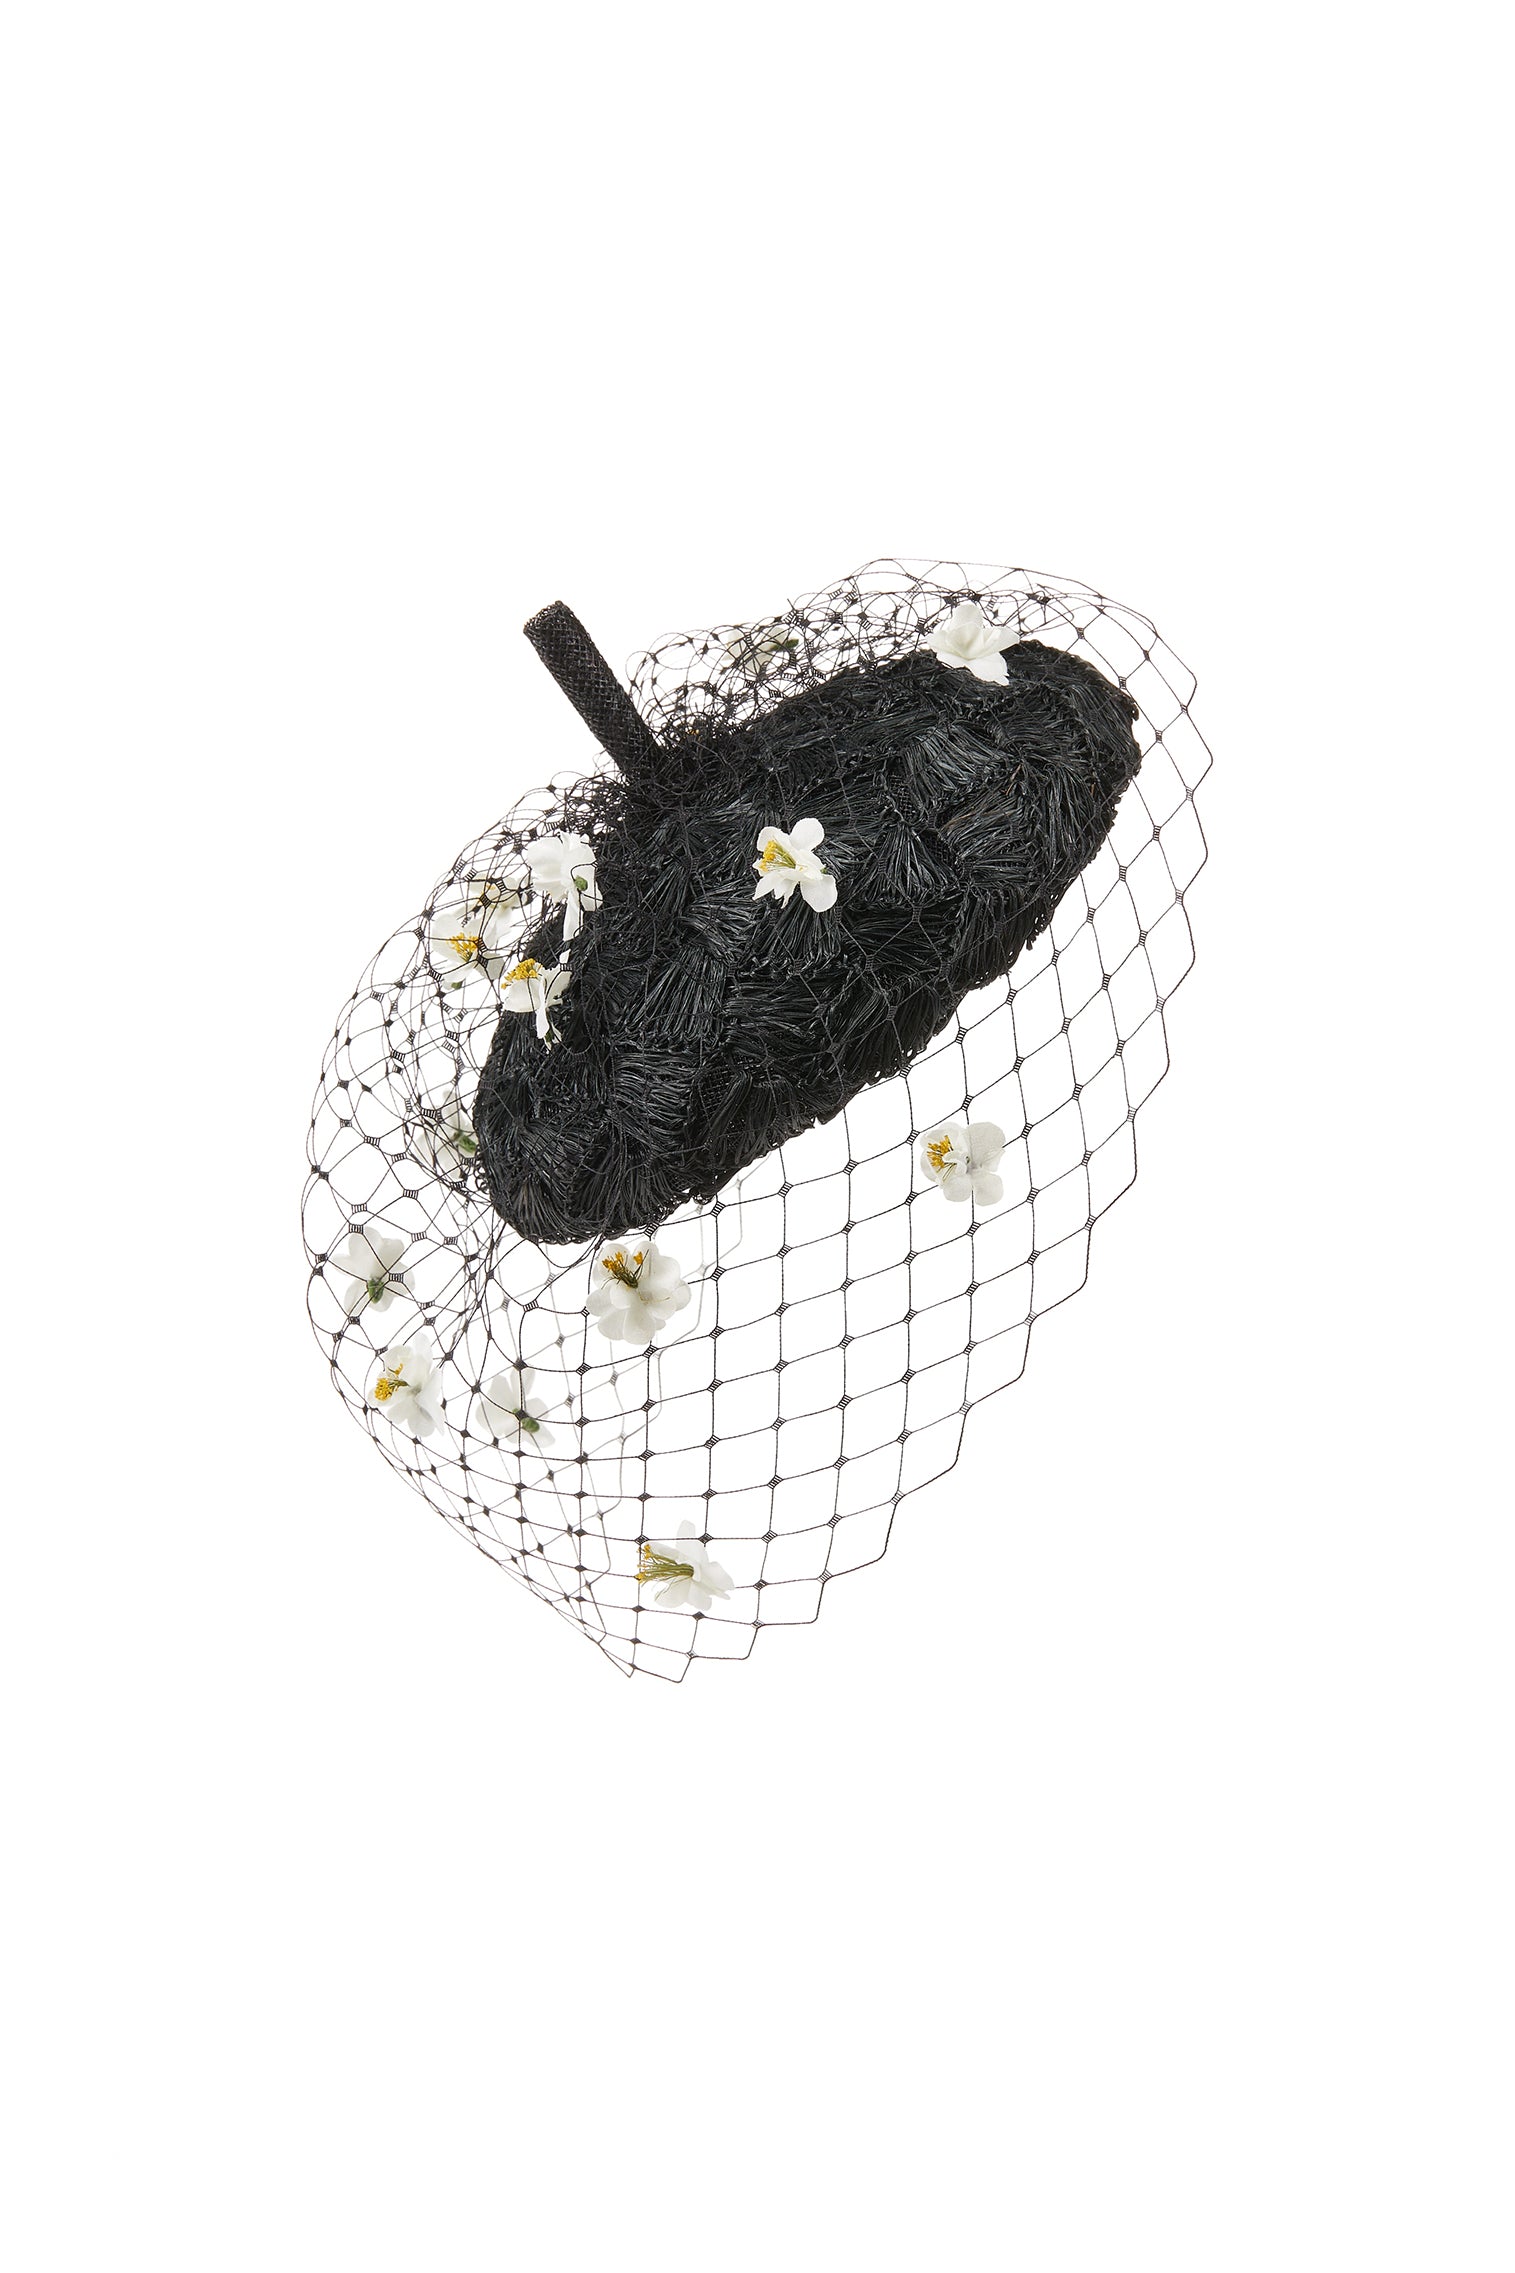 Chamomile Black Beret - Lock Couture by Awon Golding - Lock & Co. Hatters London UK